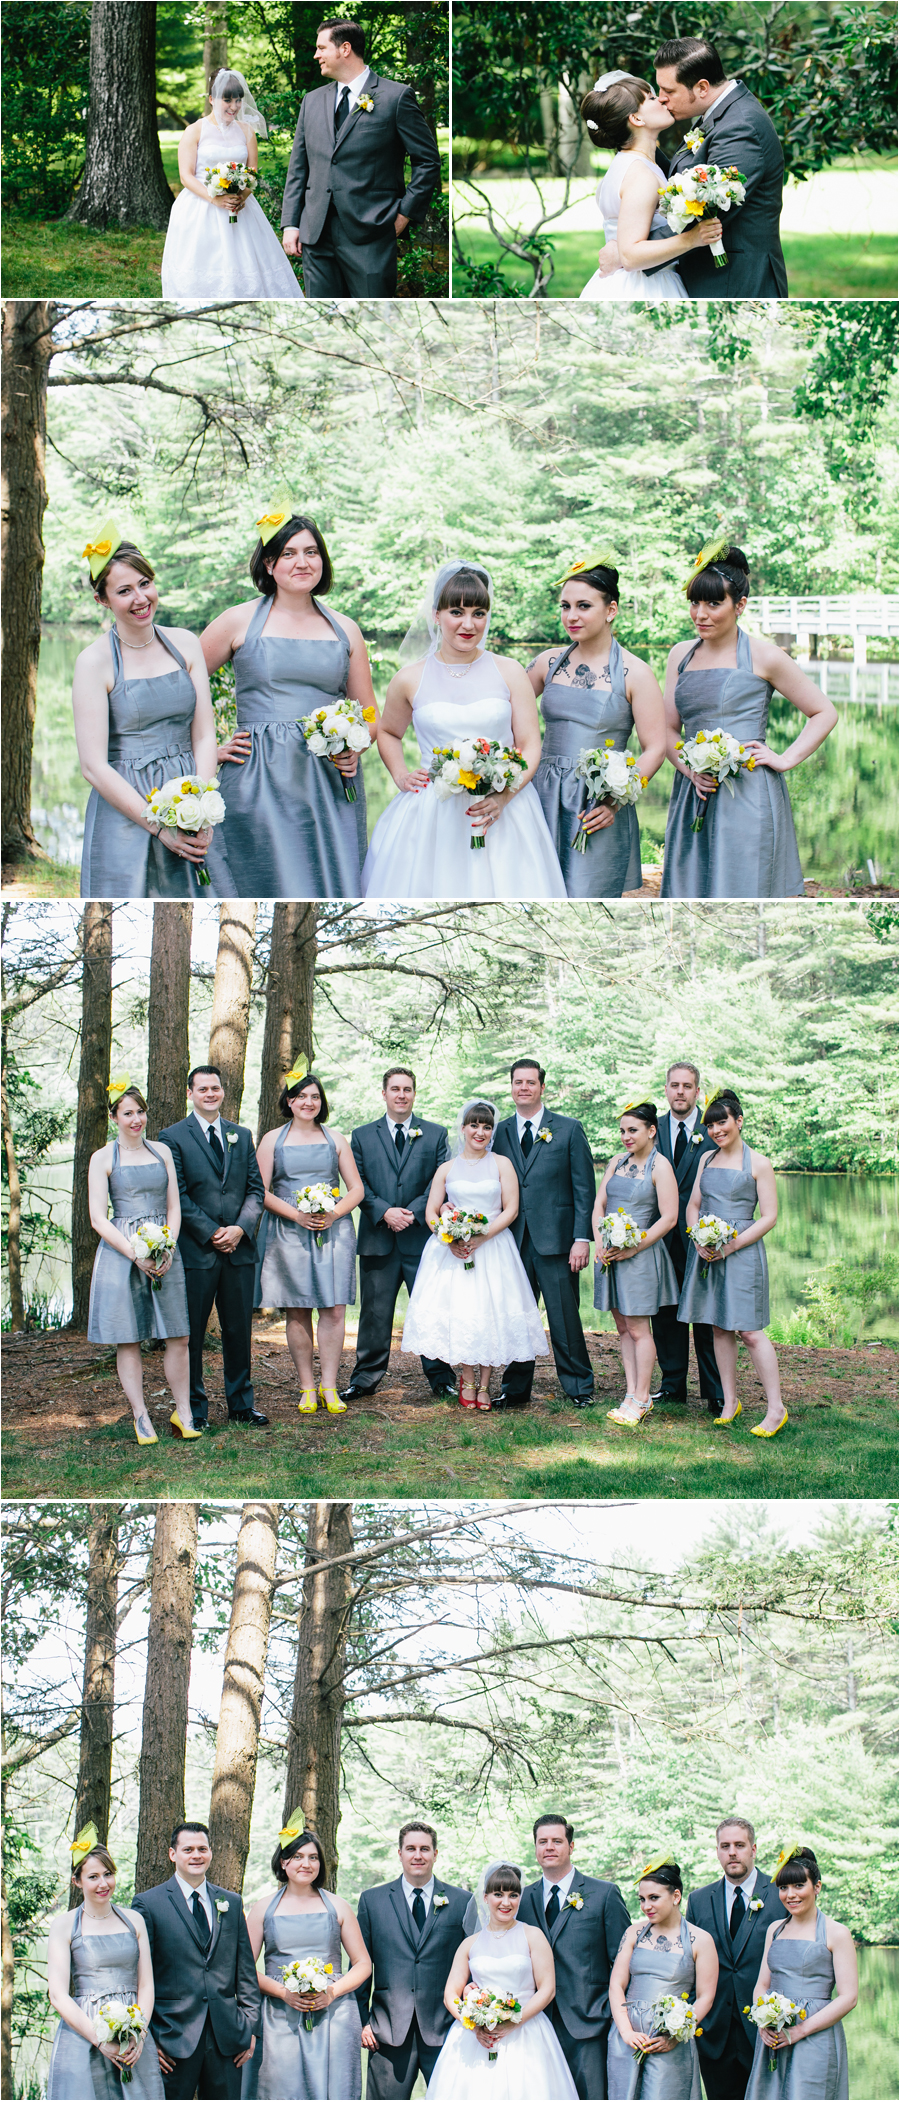 Wedding Party Photos Whispering Pines Laura & Brian   Whispering Pines Wedding Photographer